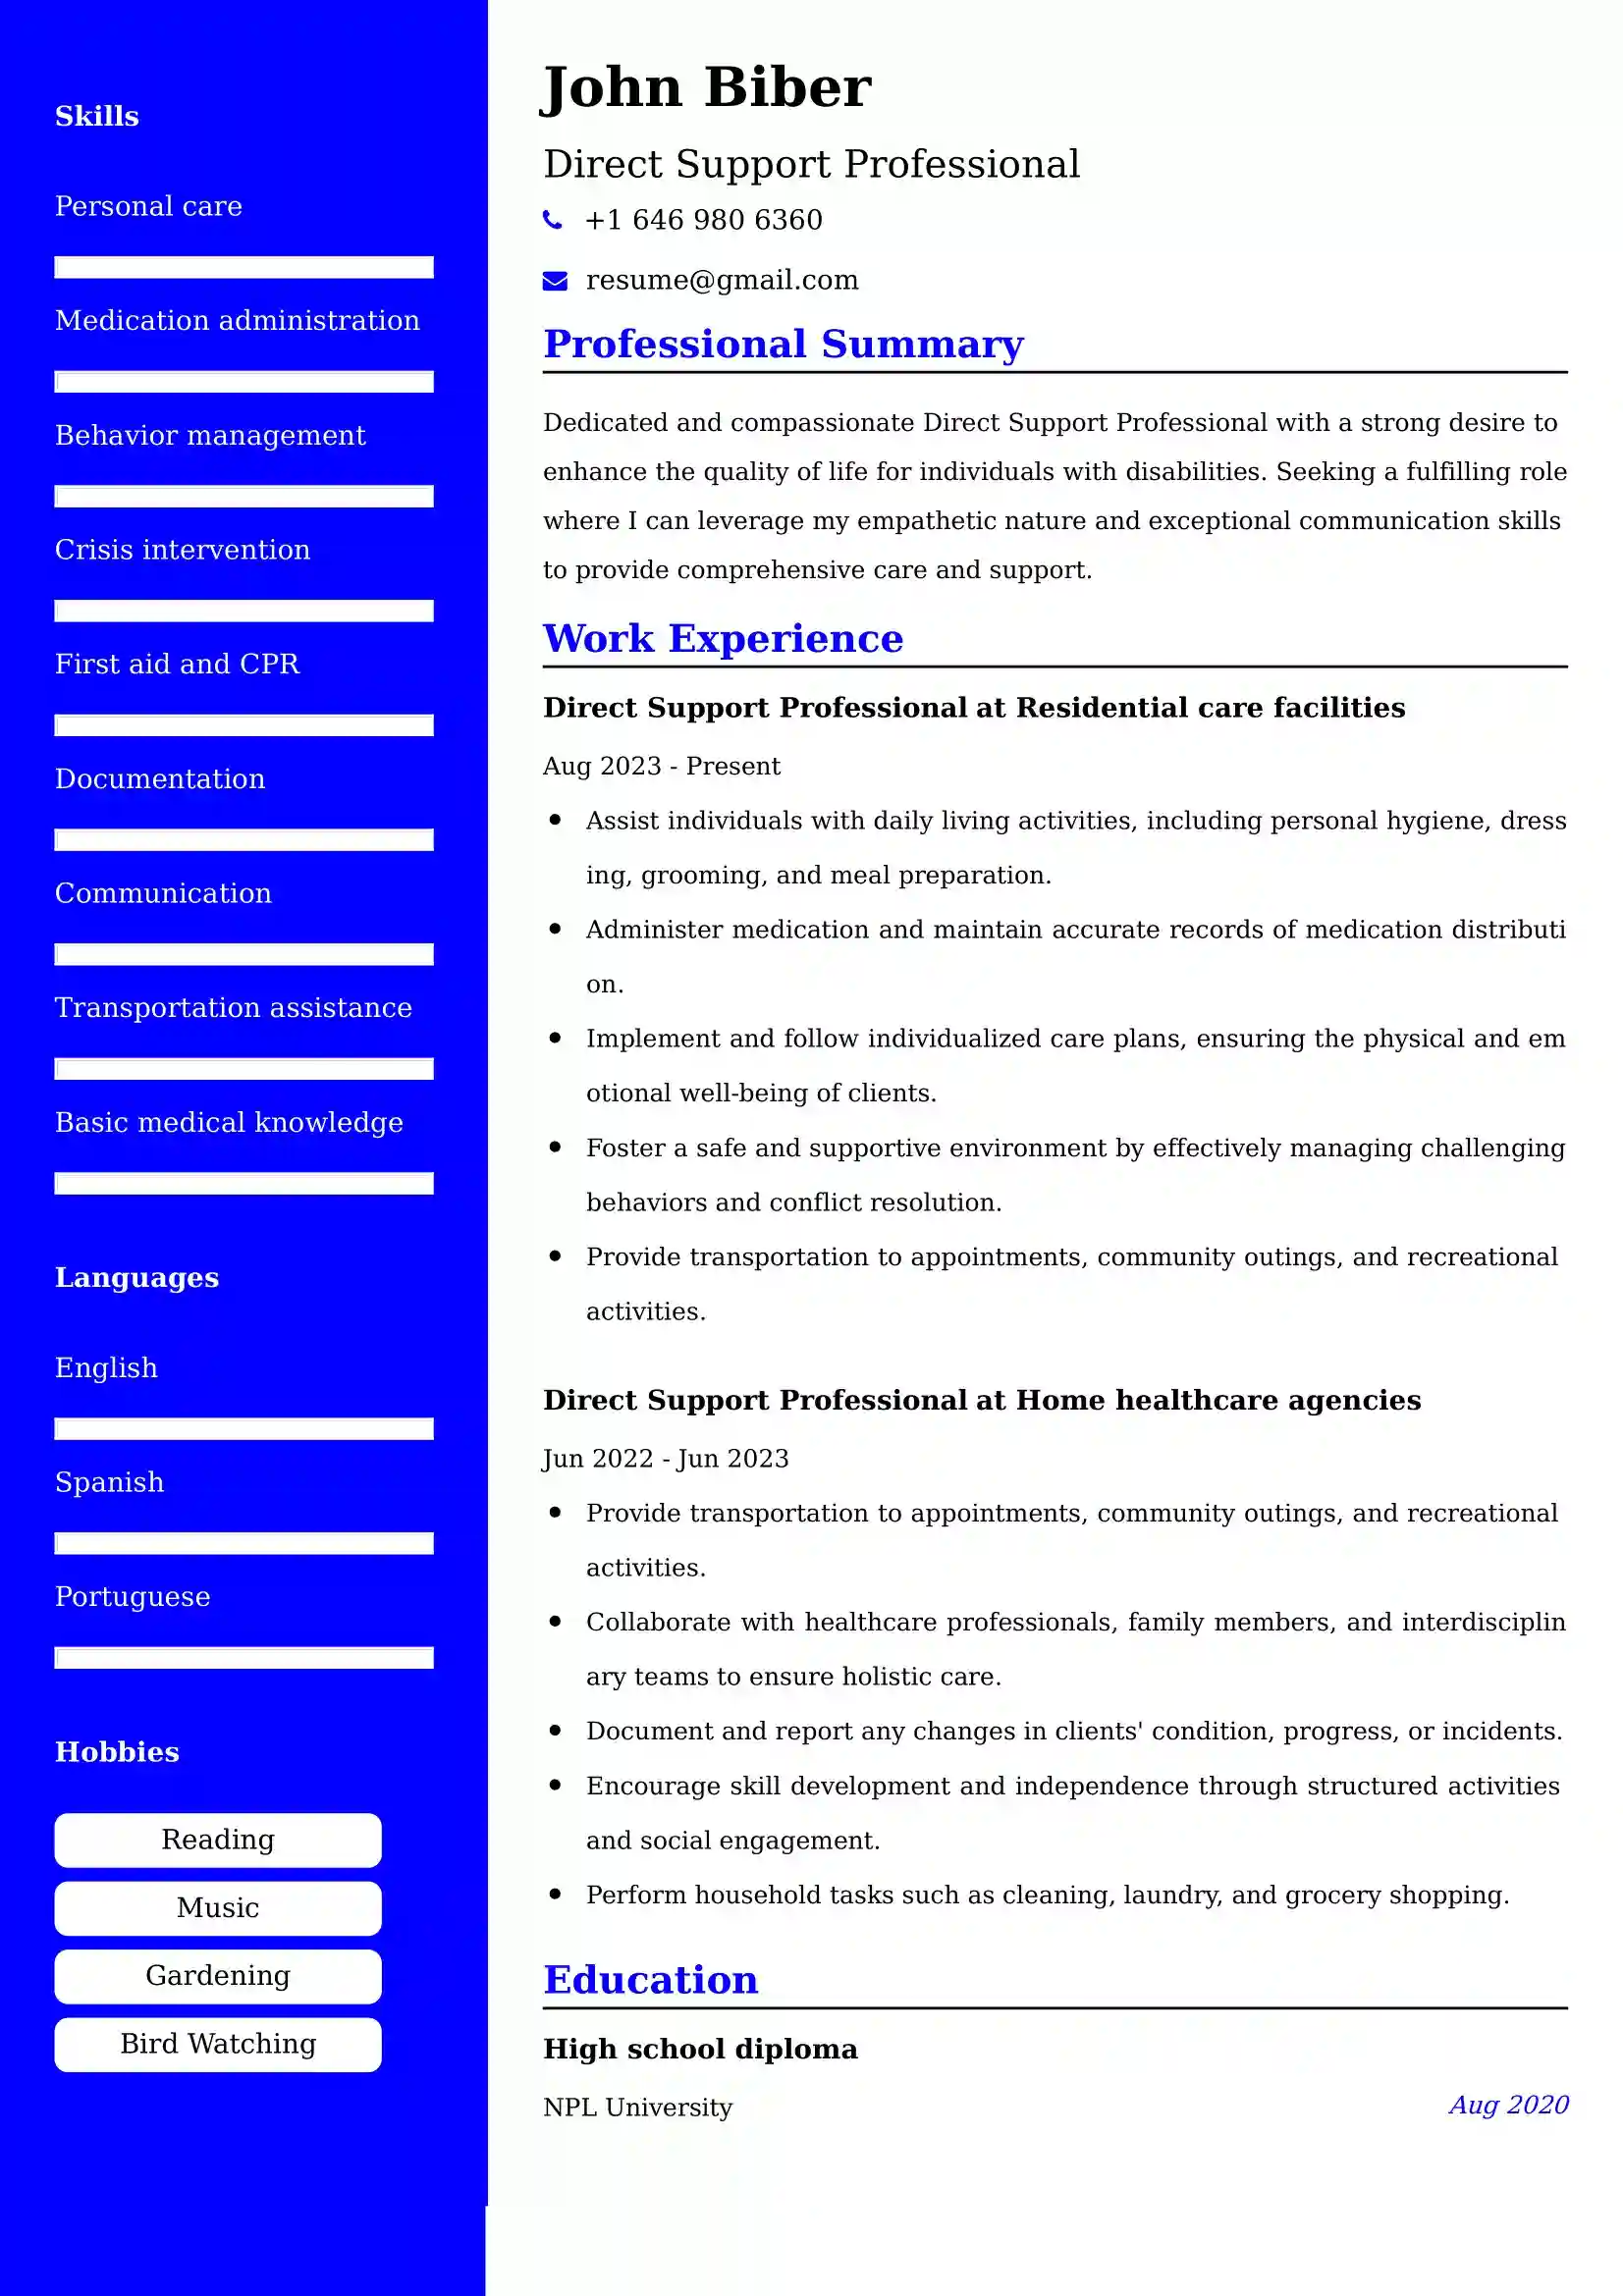 Direct Support Professional Resume Examples - Brazilian Format, Latest Template